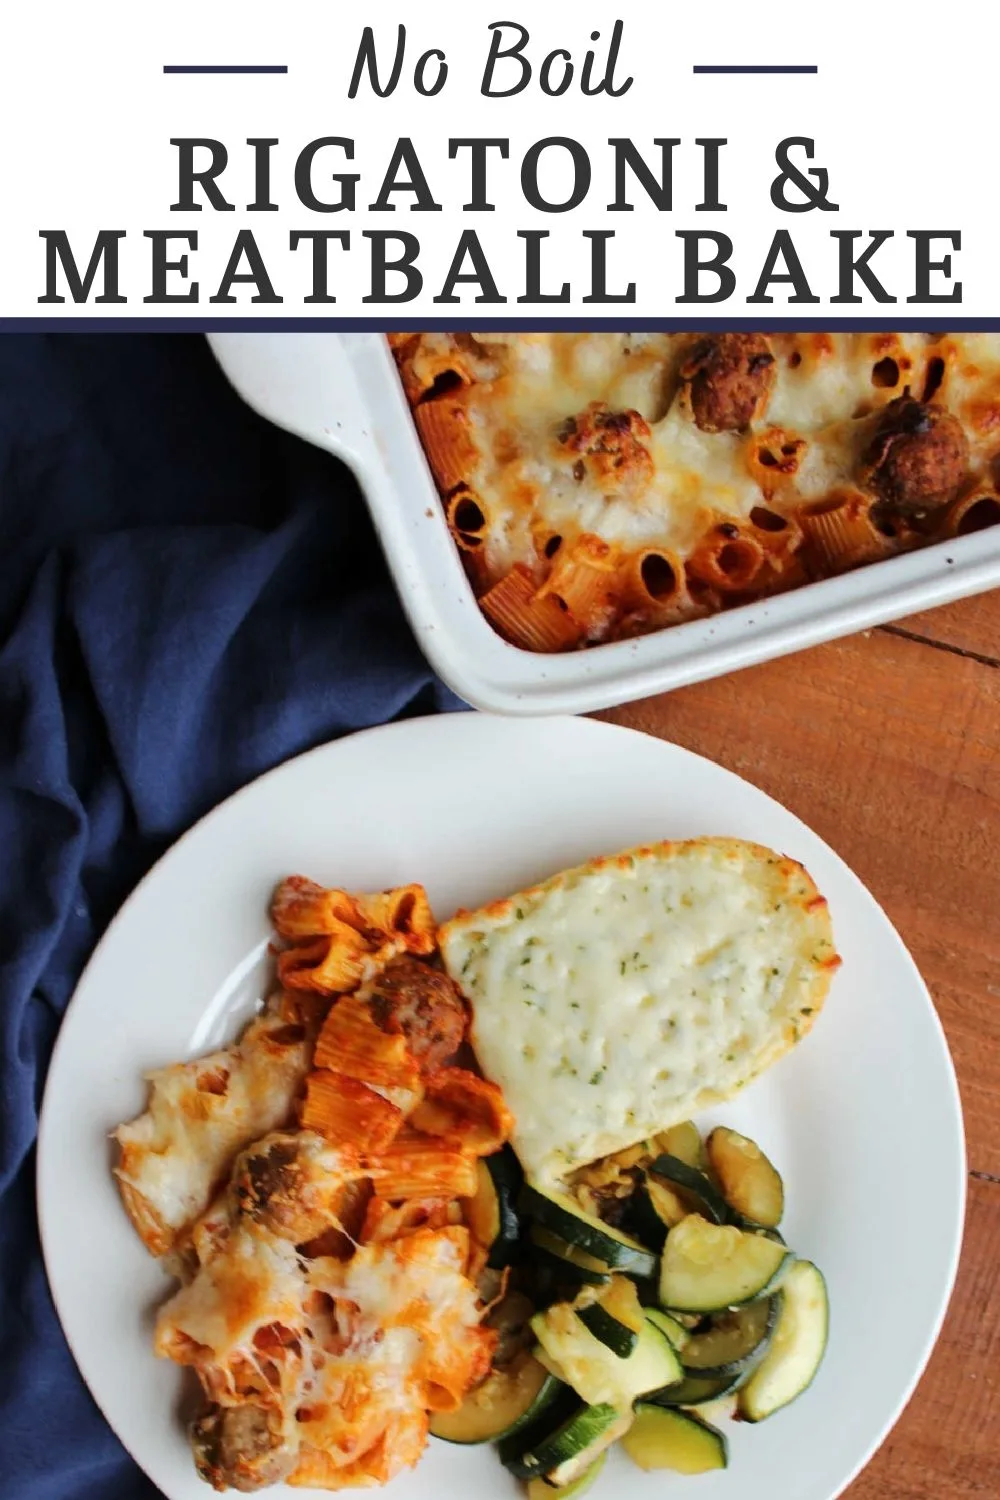 Make getting dinner on the table super easy with this no boil rigatoni and meatball bake. It takes almost no prep work and results in a tasty and filling meal.